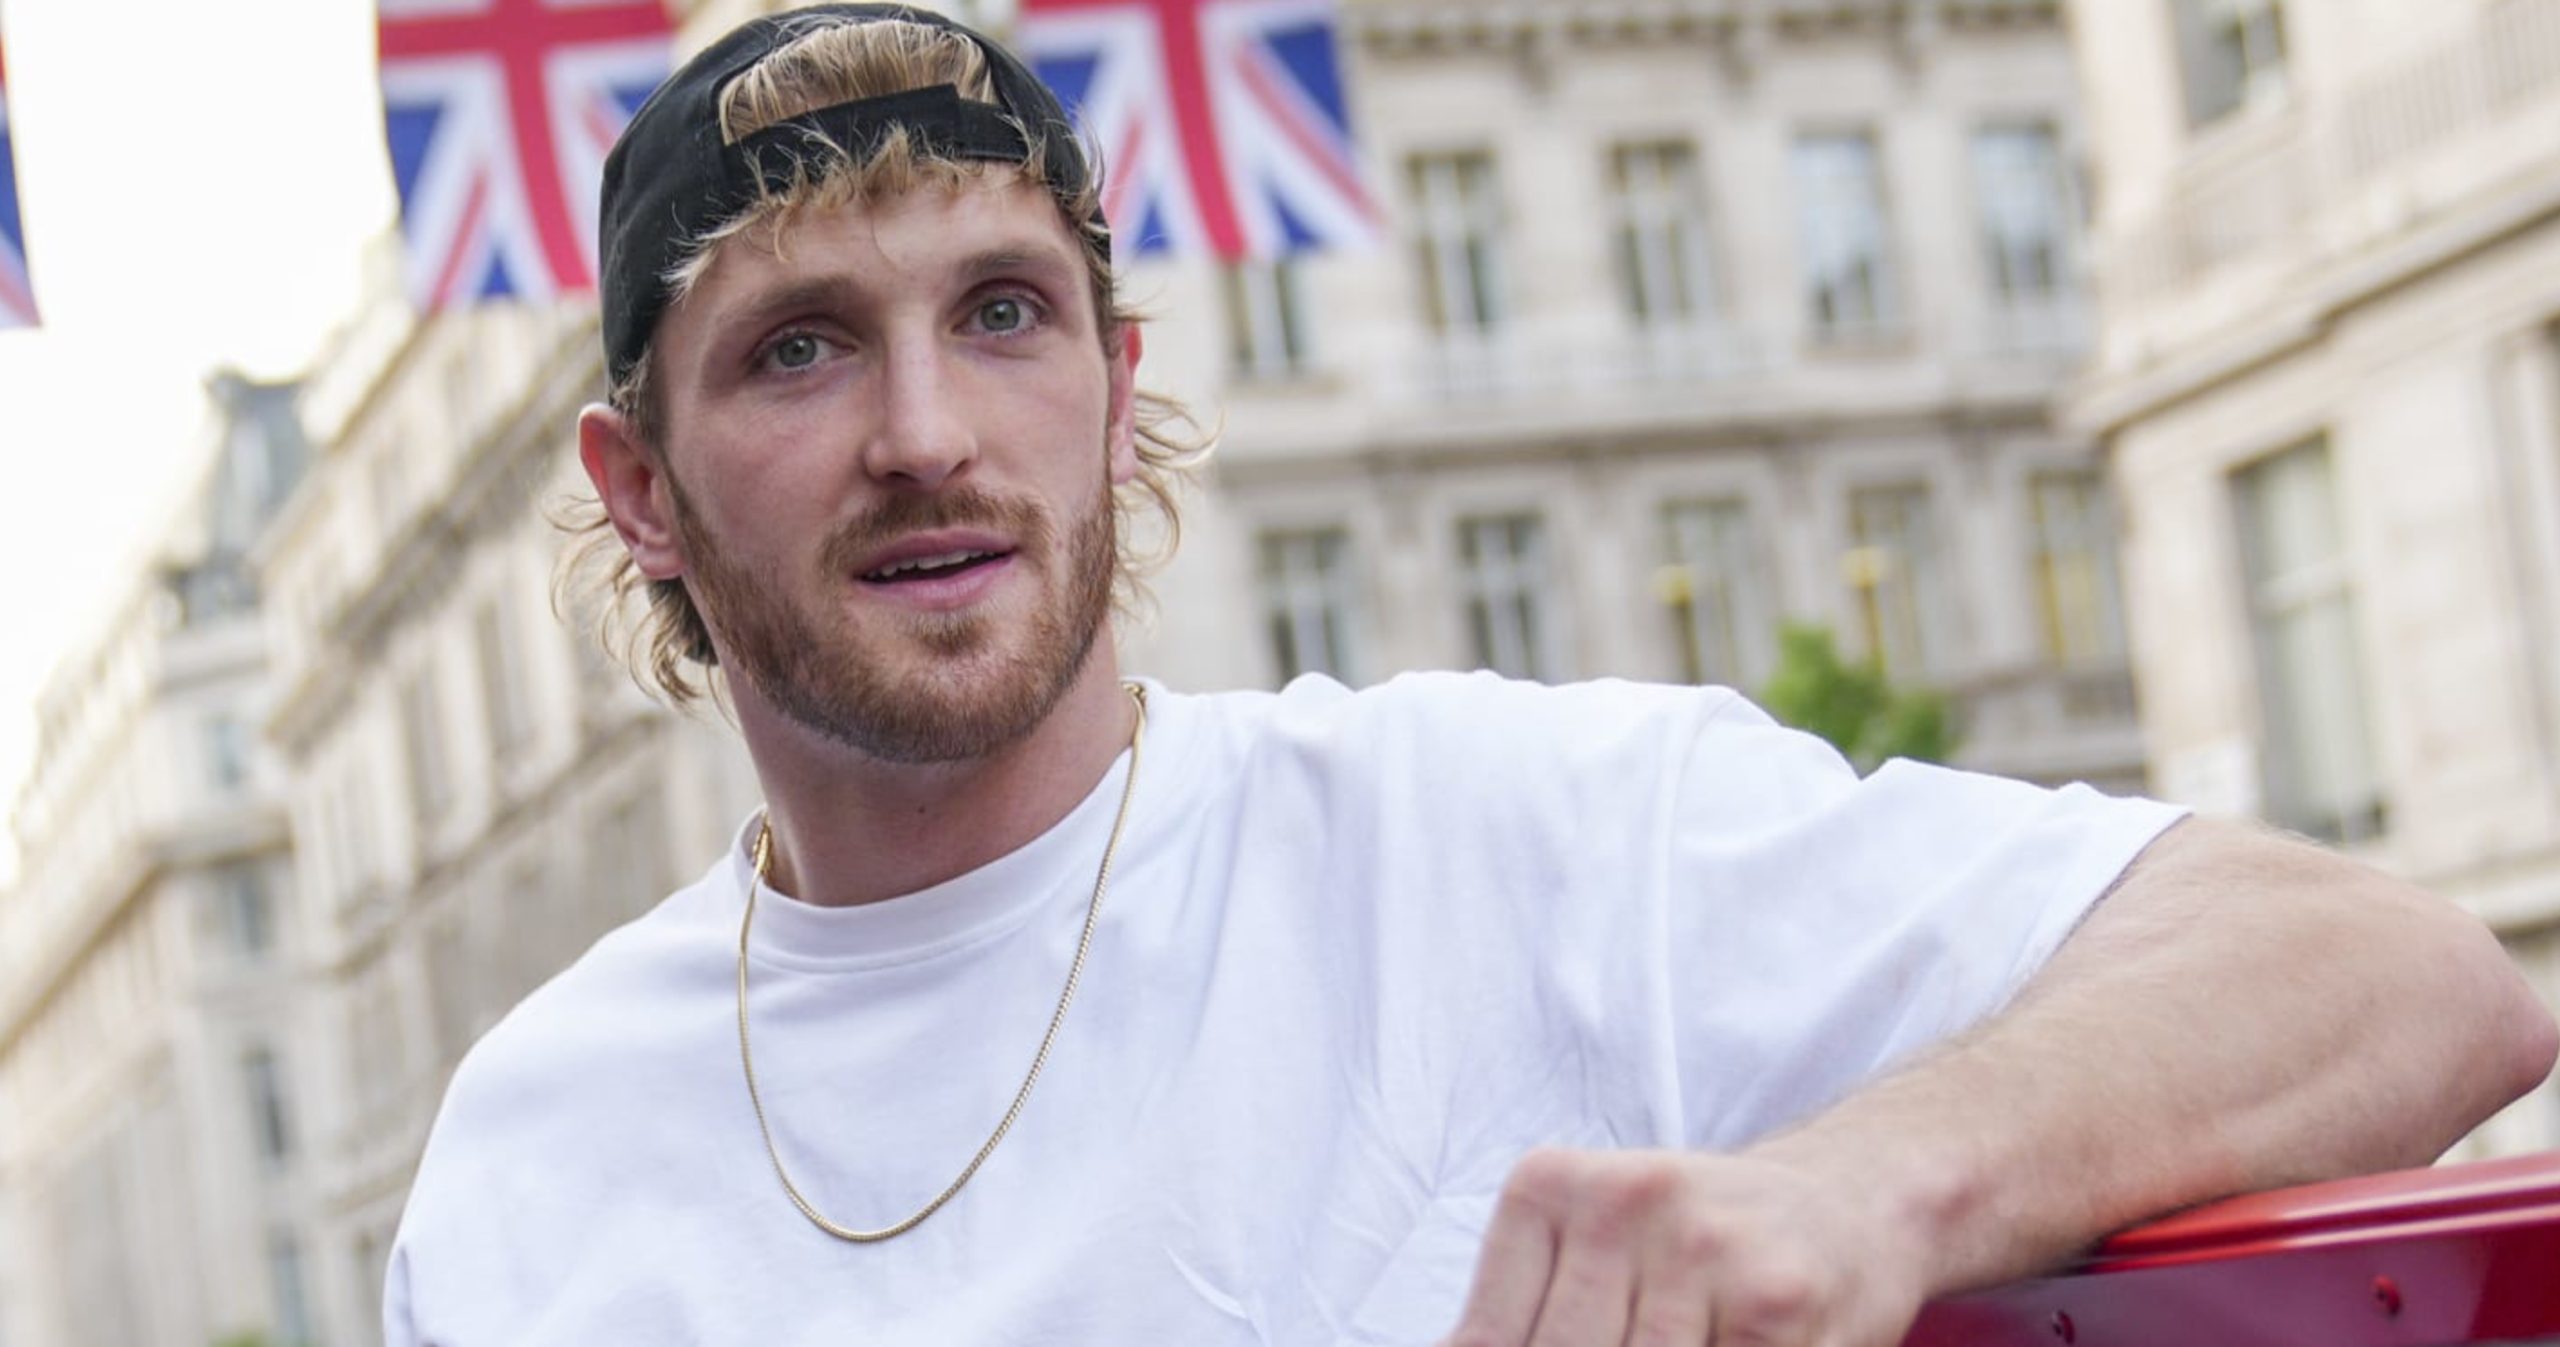 Logan Paul Ready for WWE? Find out if the controversial YouTuber is set to make his wrestling debut. 12